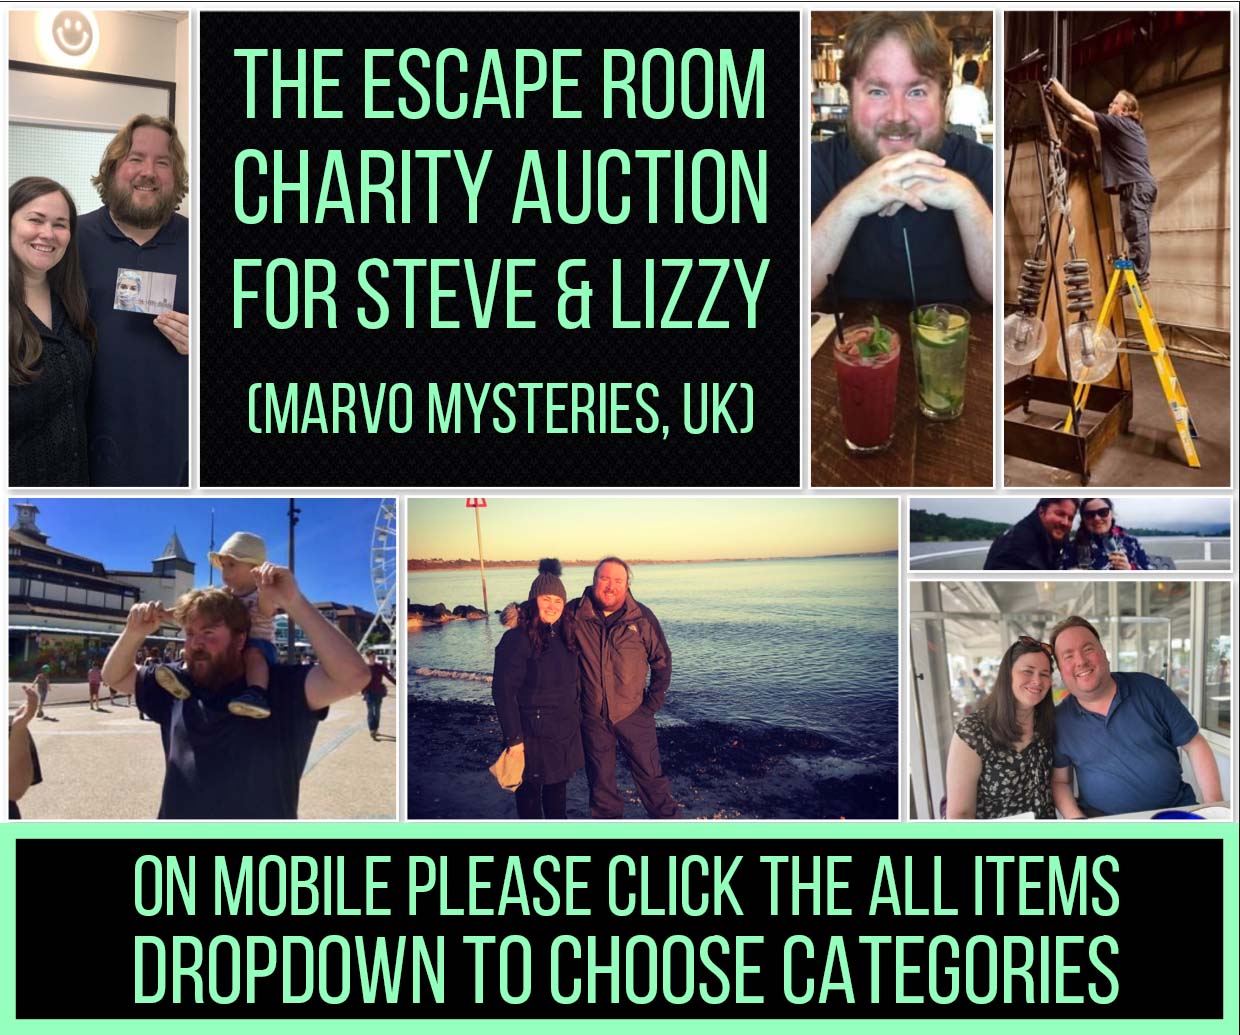 Last Chance to Support this Escape Room Community Charity Fundraiser